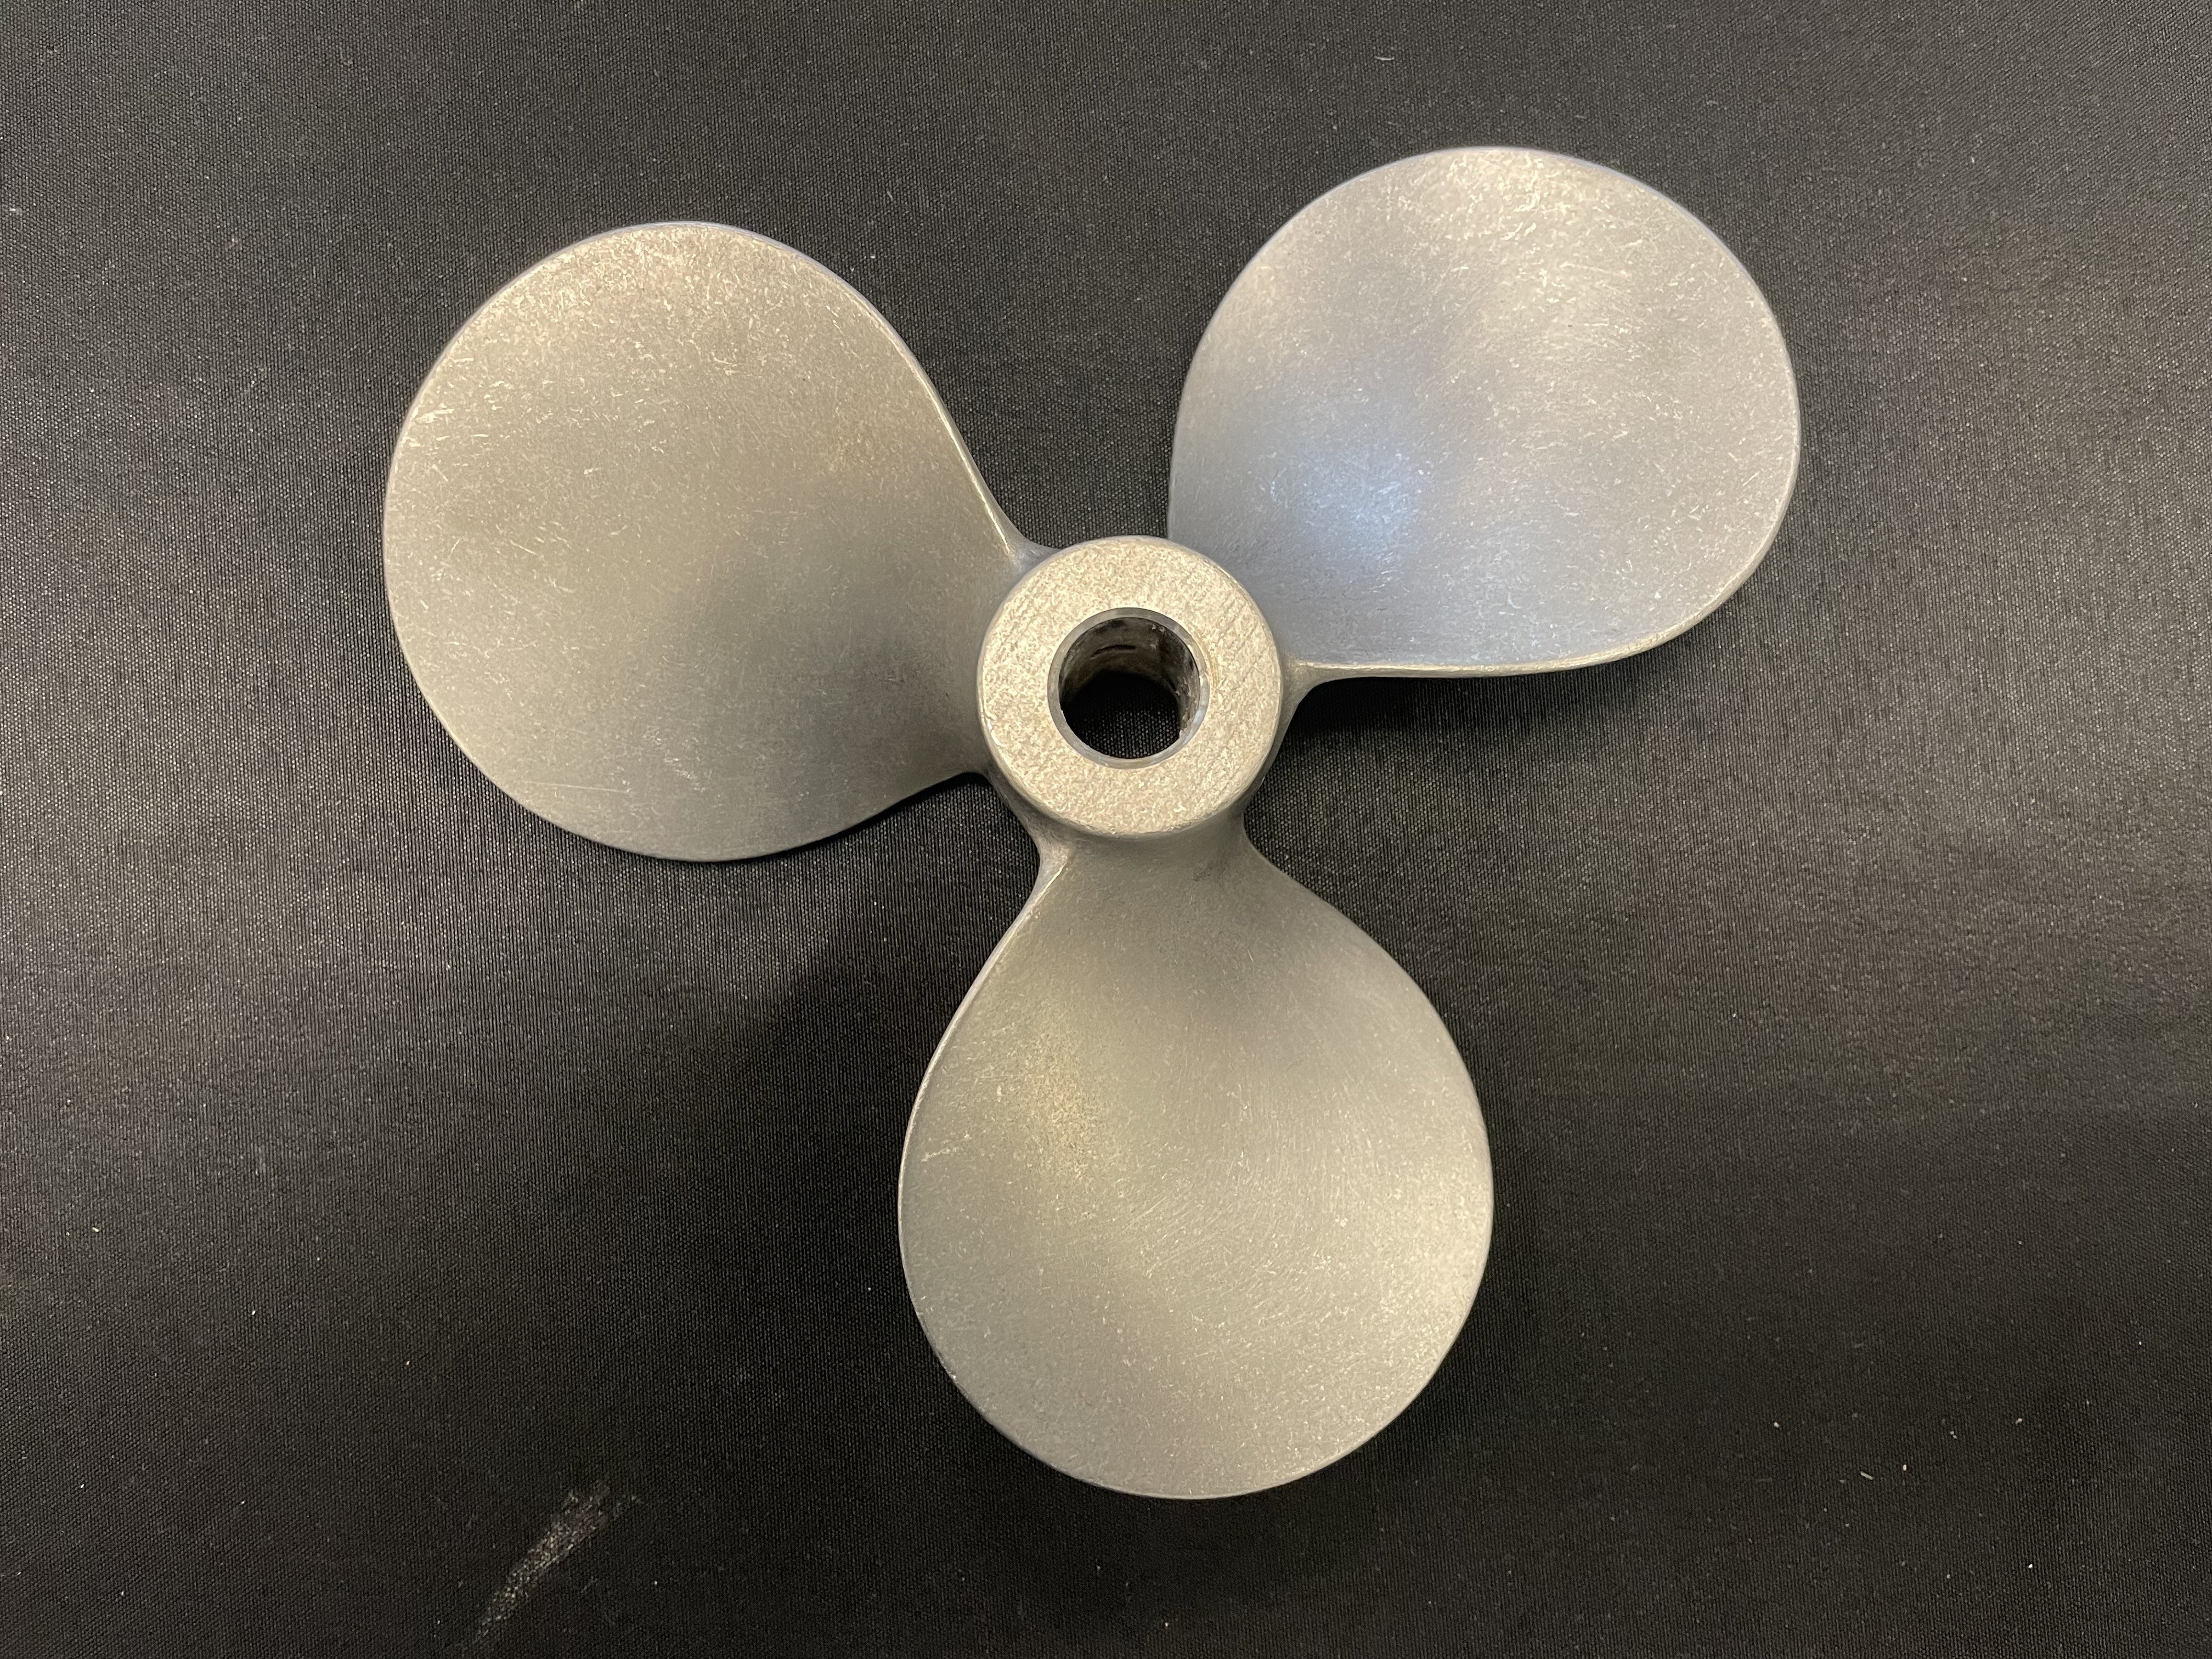 Propeller for Mixer 9" diameter with 5" pitch. 3/4" Shaft Bore